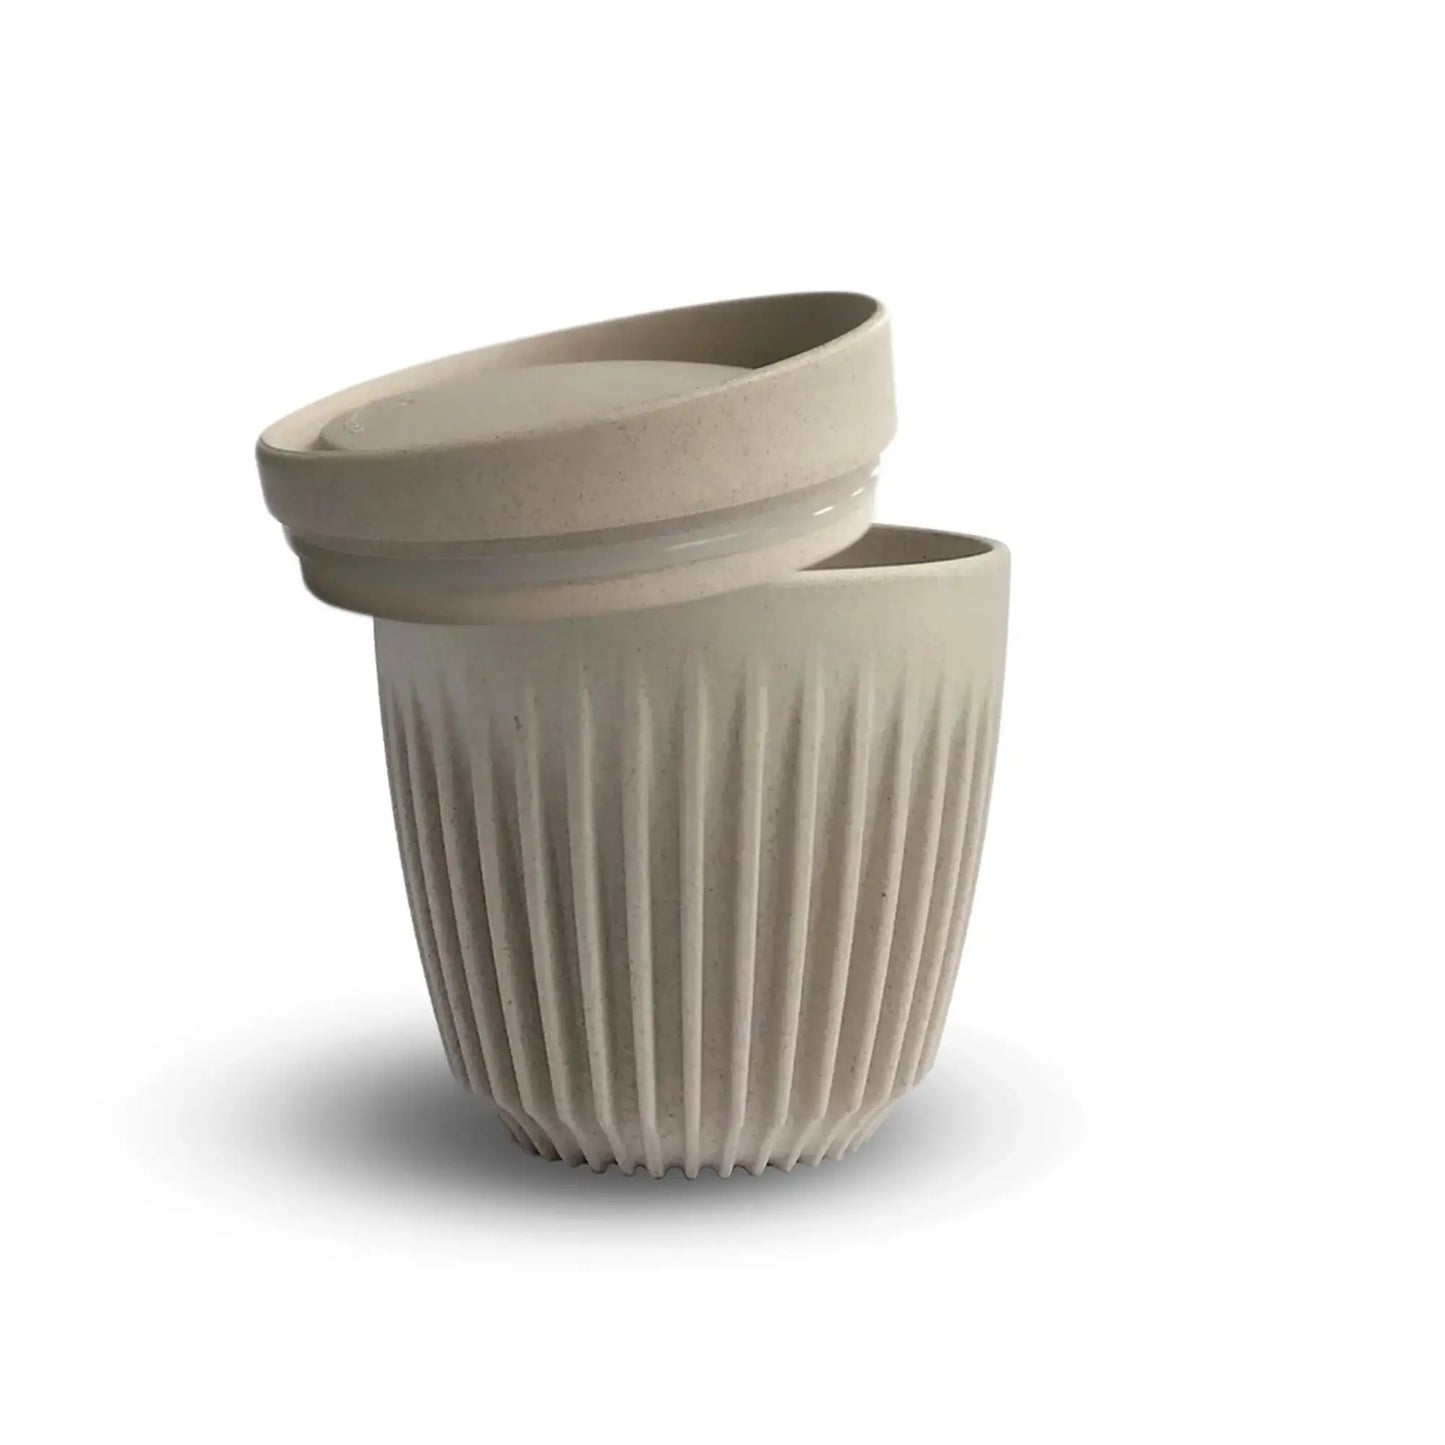 Huskee Cup with Lid - 350 ml (12 oz) - Natural